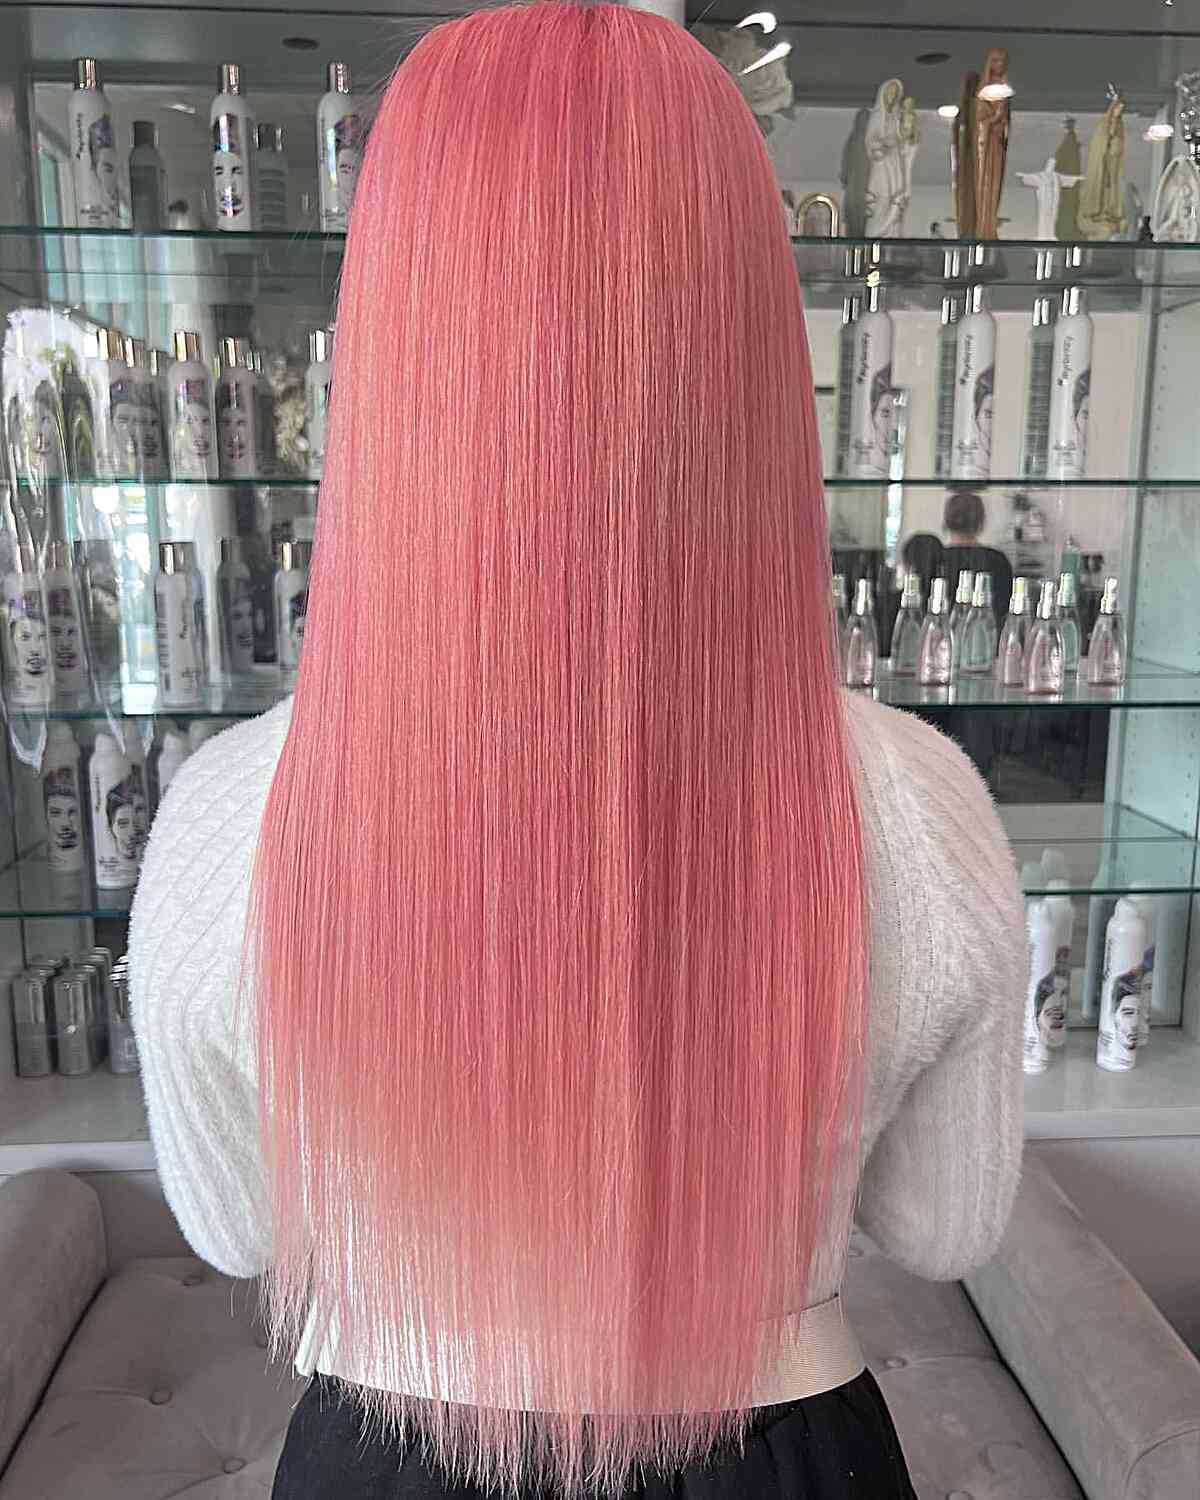 Global Pastel Pink Straight Hair for women with long hair